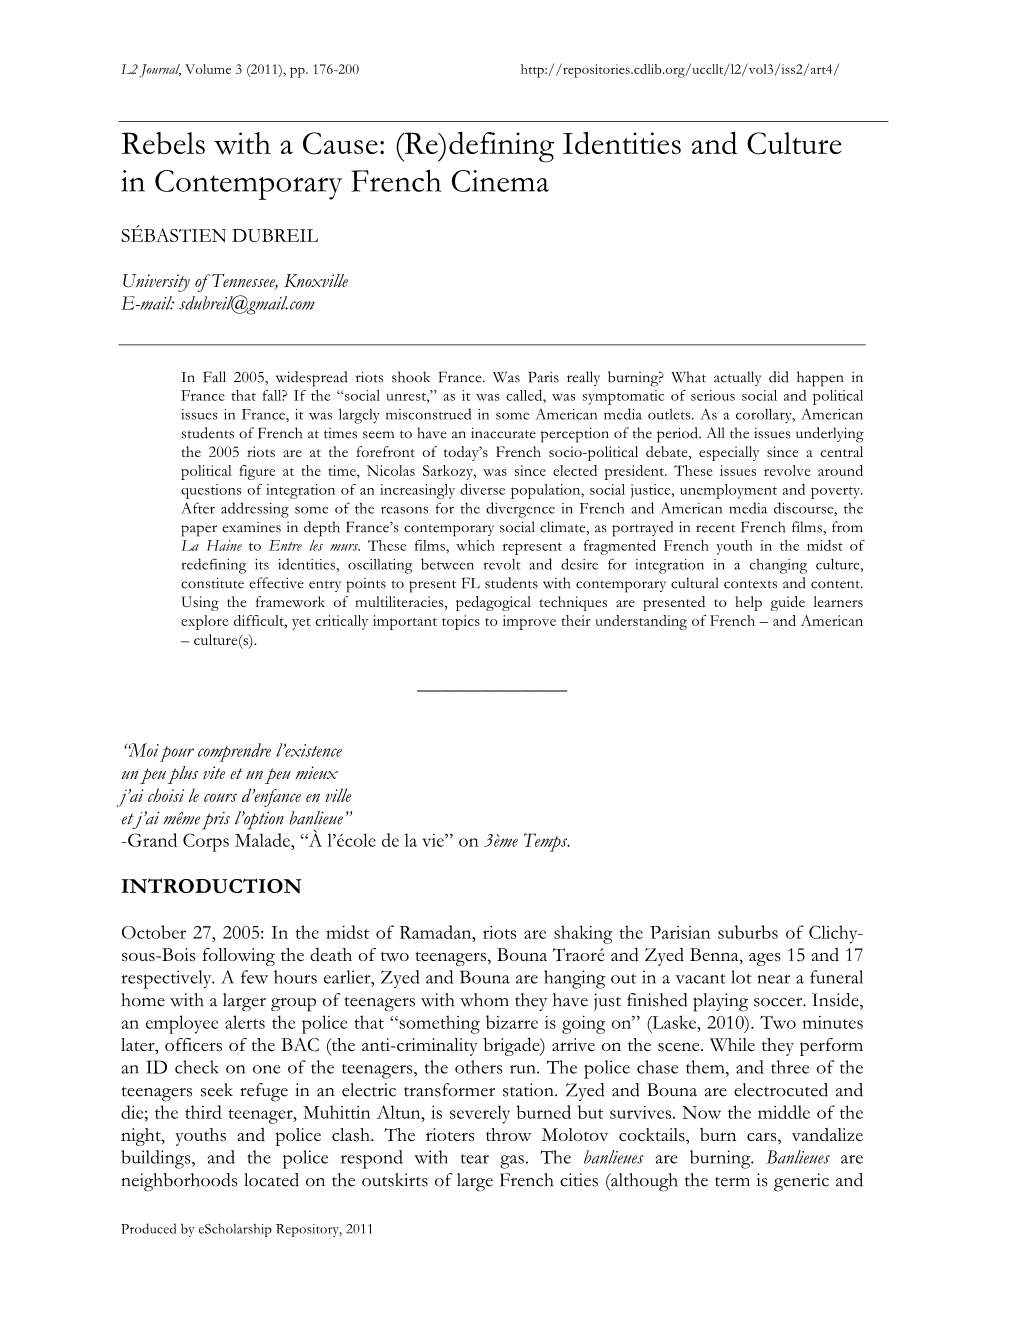 Defining Identities and Culture in Contemporary French Cinema